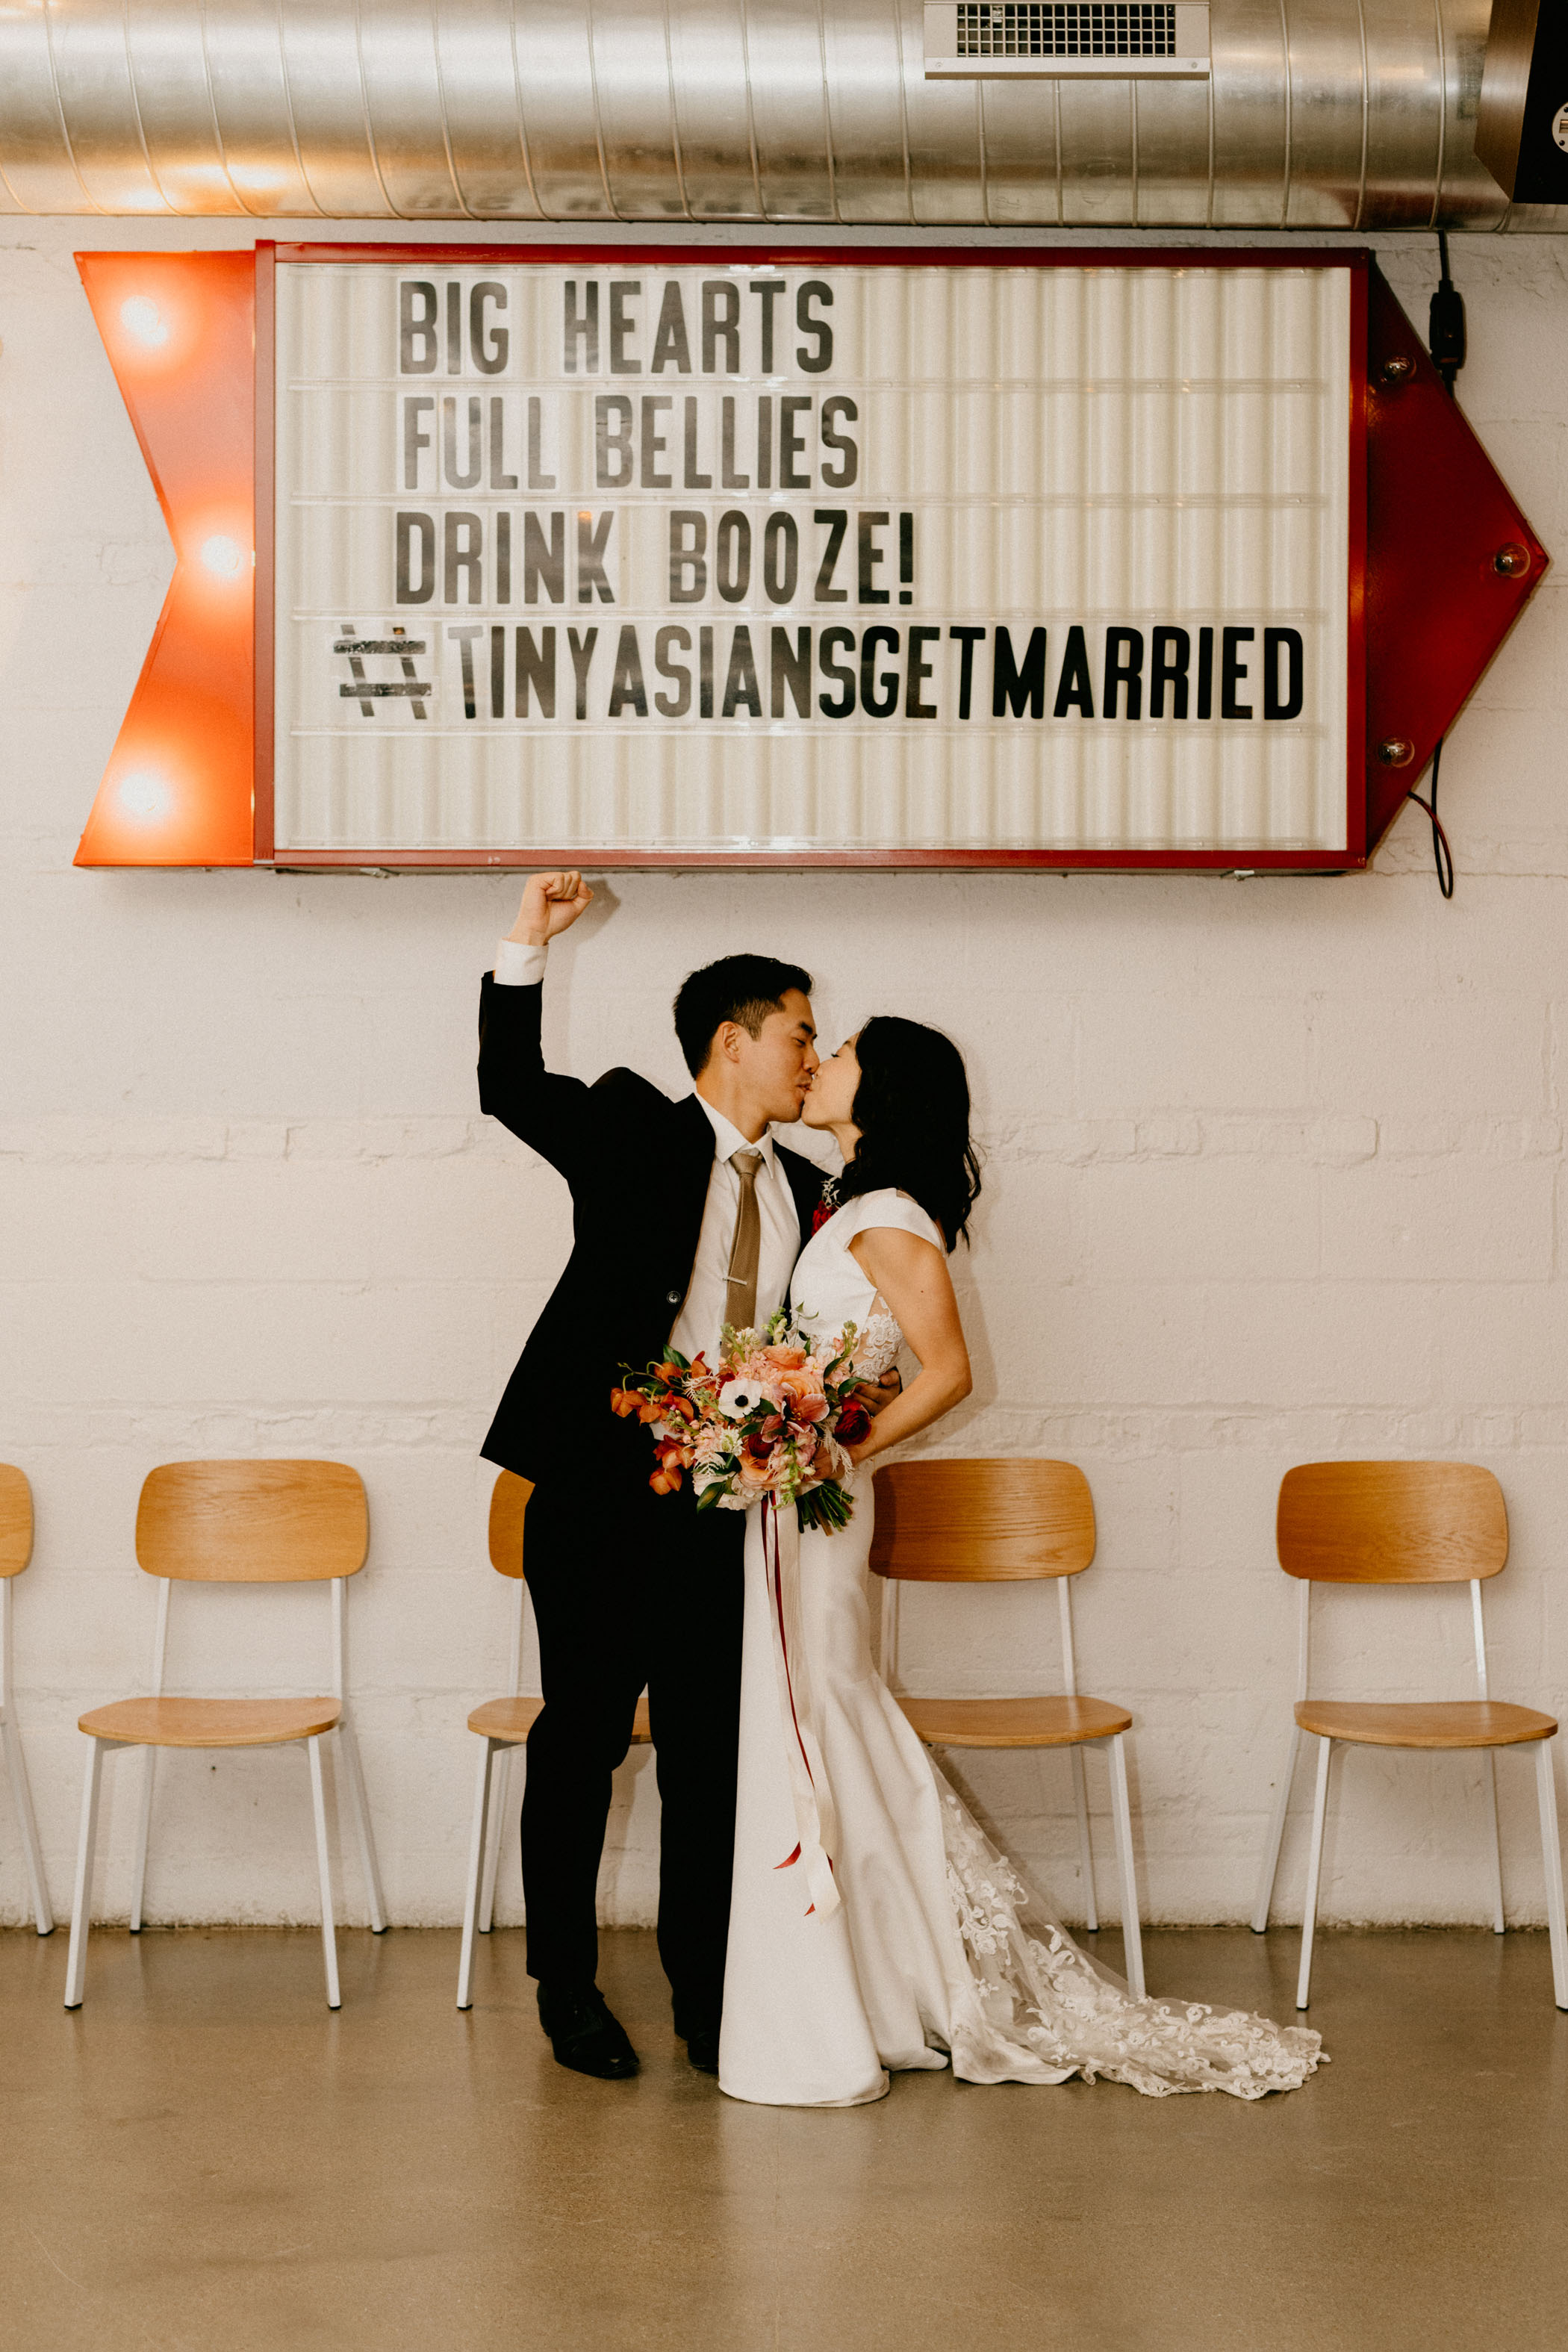 Fried Chicken and Good Vibes Took Center Stage at This Fun-Loving Wedding in Chicago